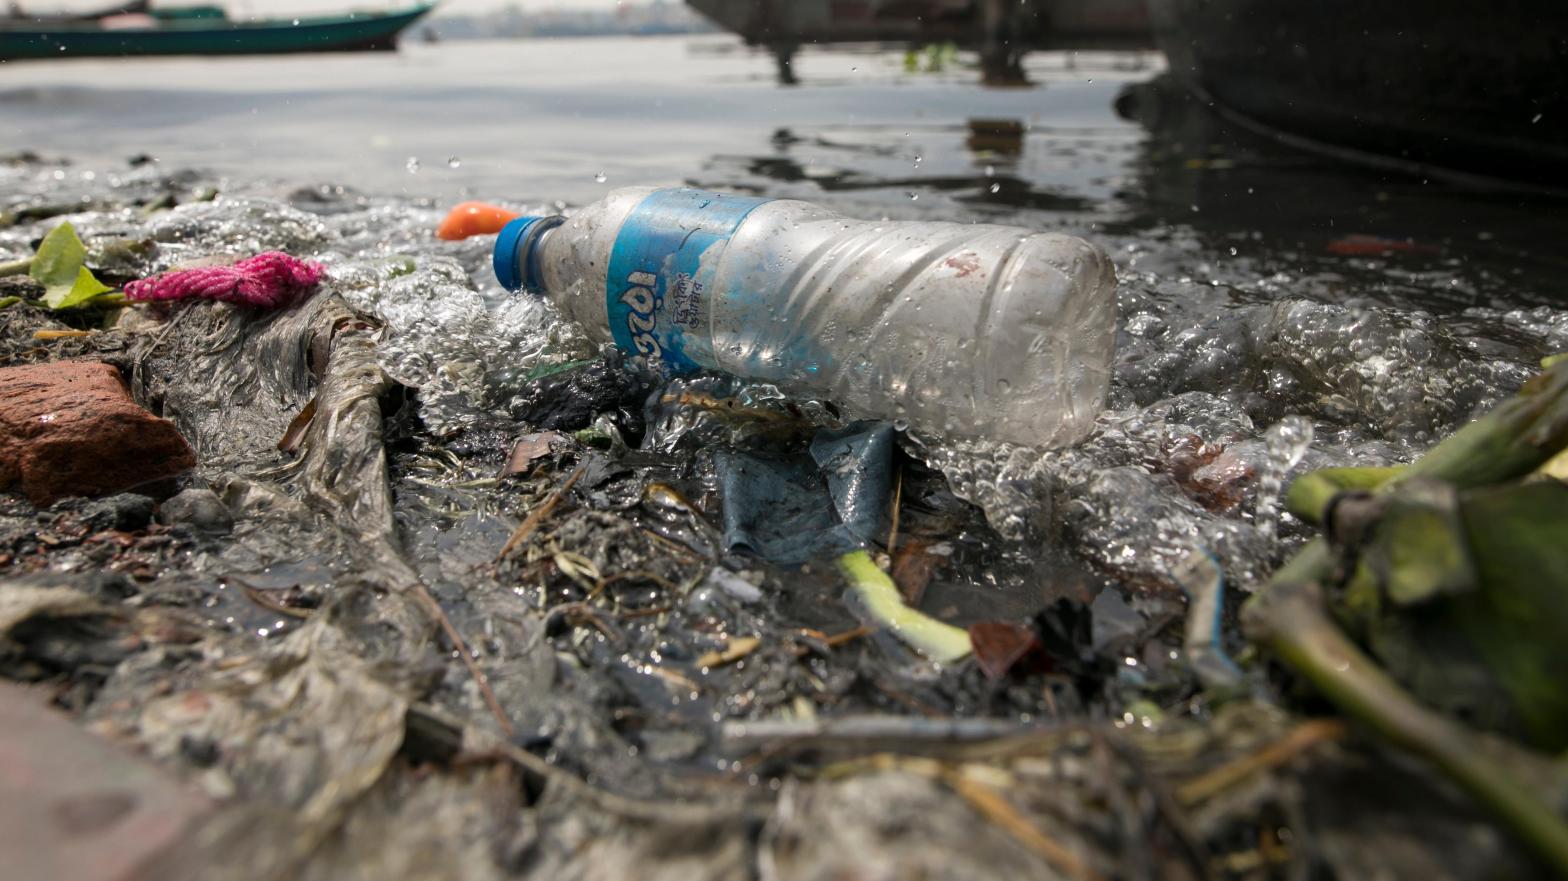 PFAS chemicals end up in our environment through the plastic products and other trash we throw out.  (Image: Zakir Hossain Chowdhury/NurPhoto, Getty Images)